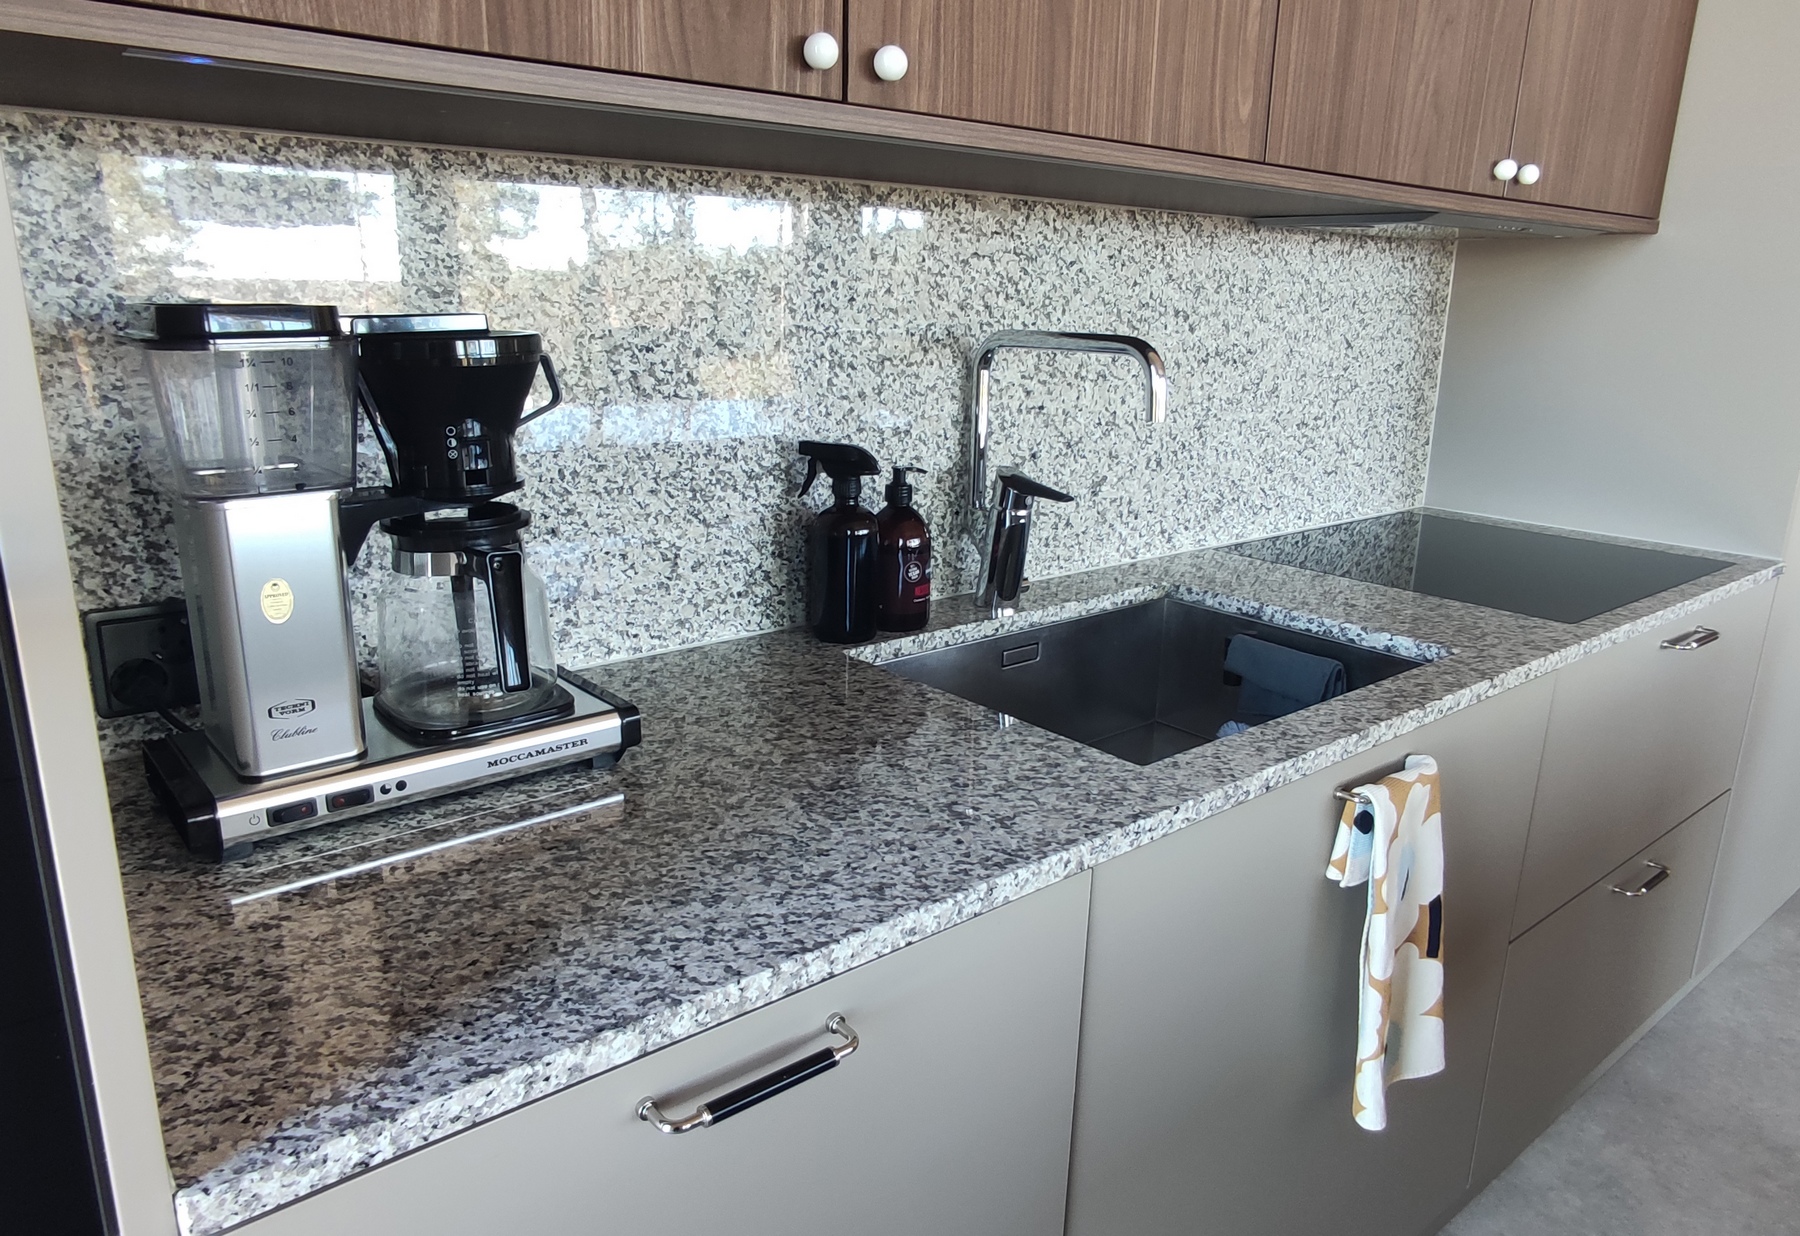 Bianco Sardo granite - even a family home can be very stylish - Granitop